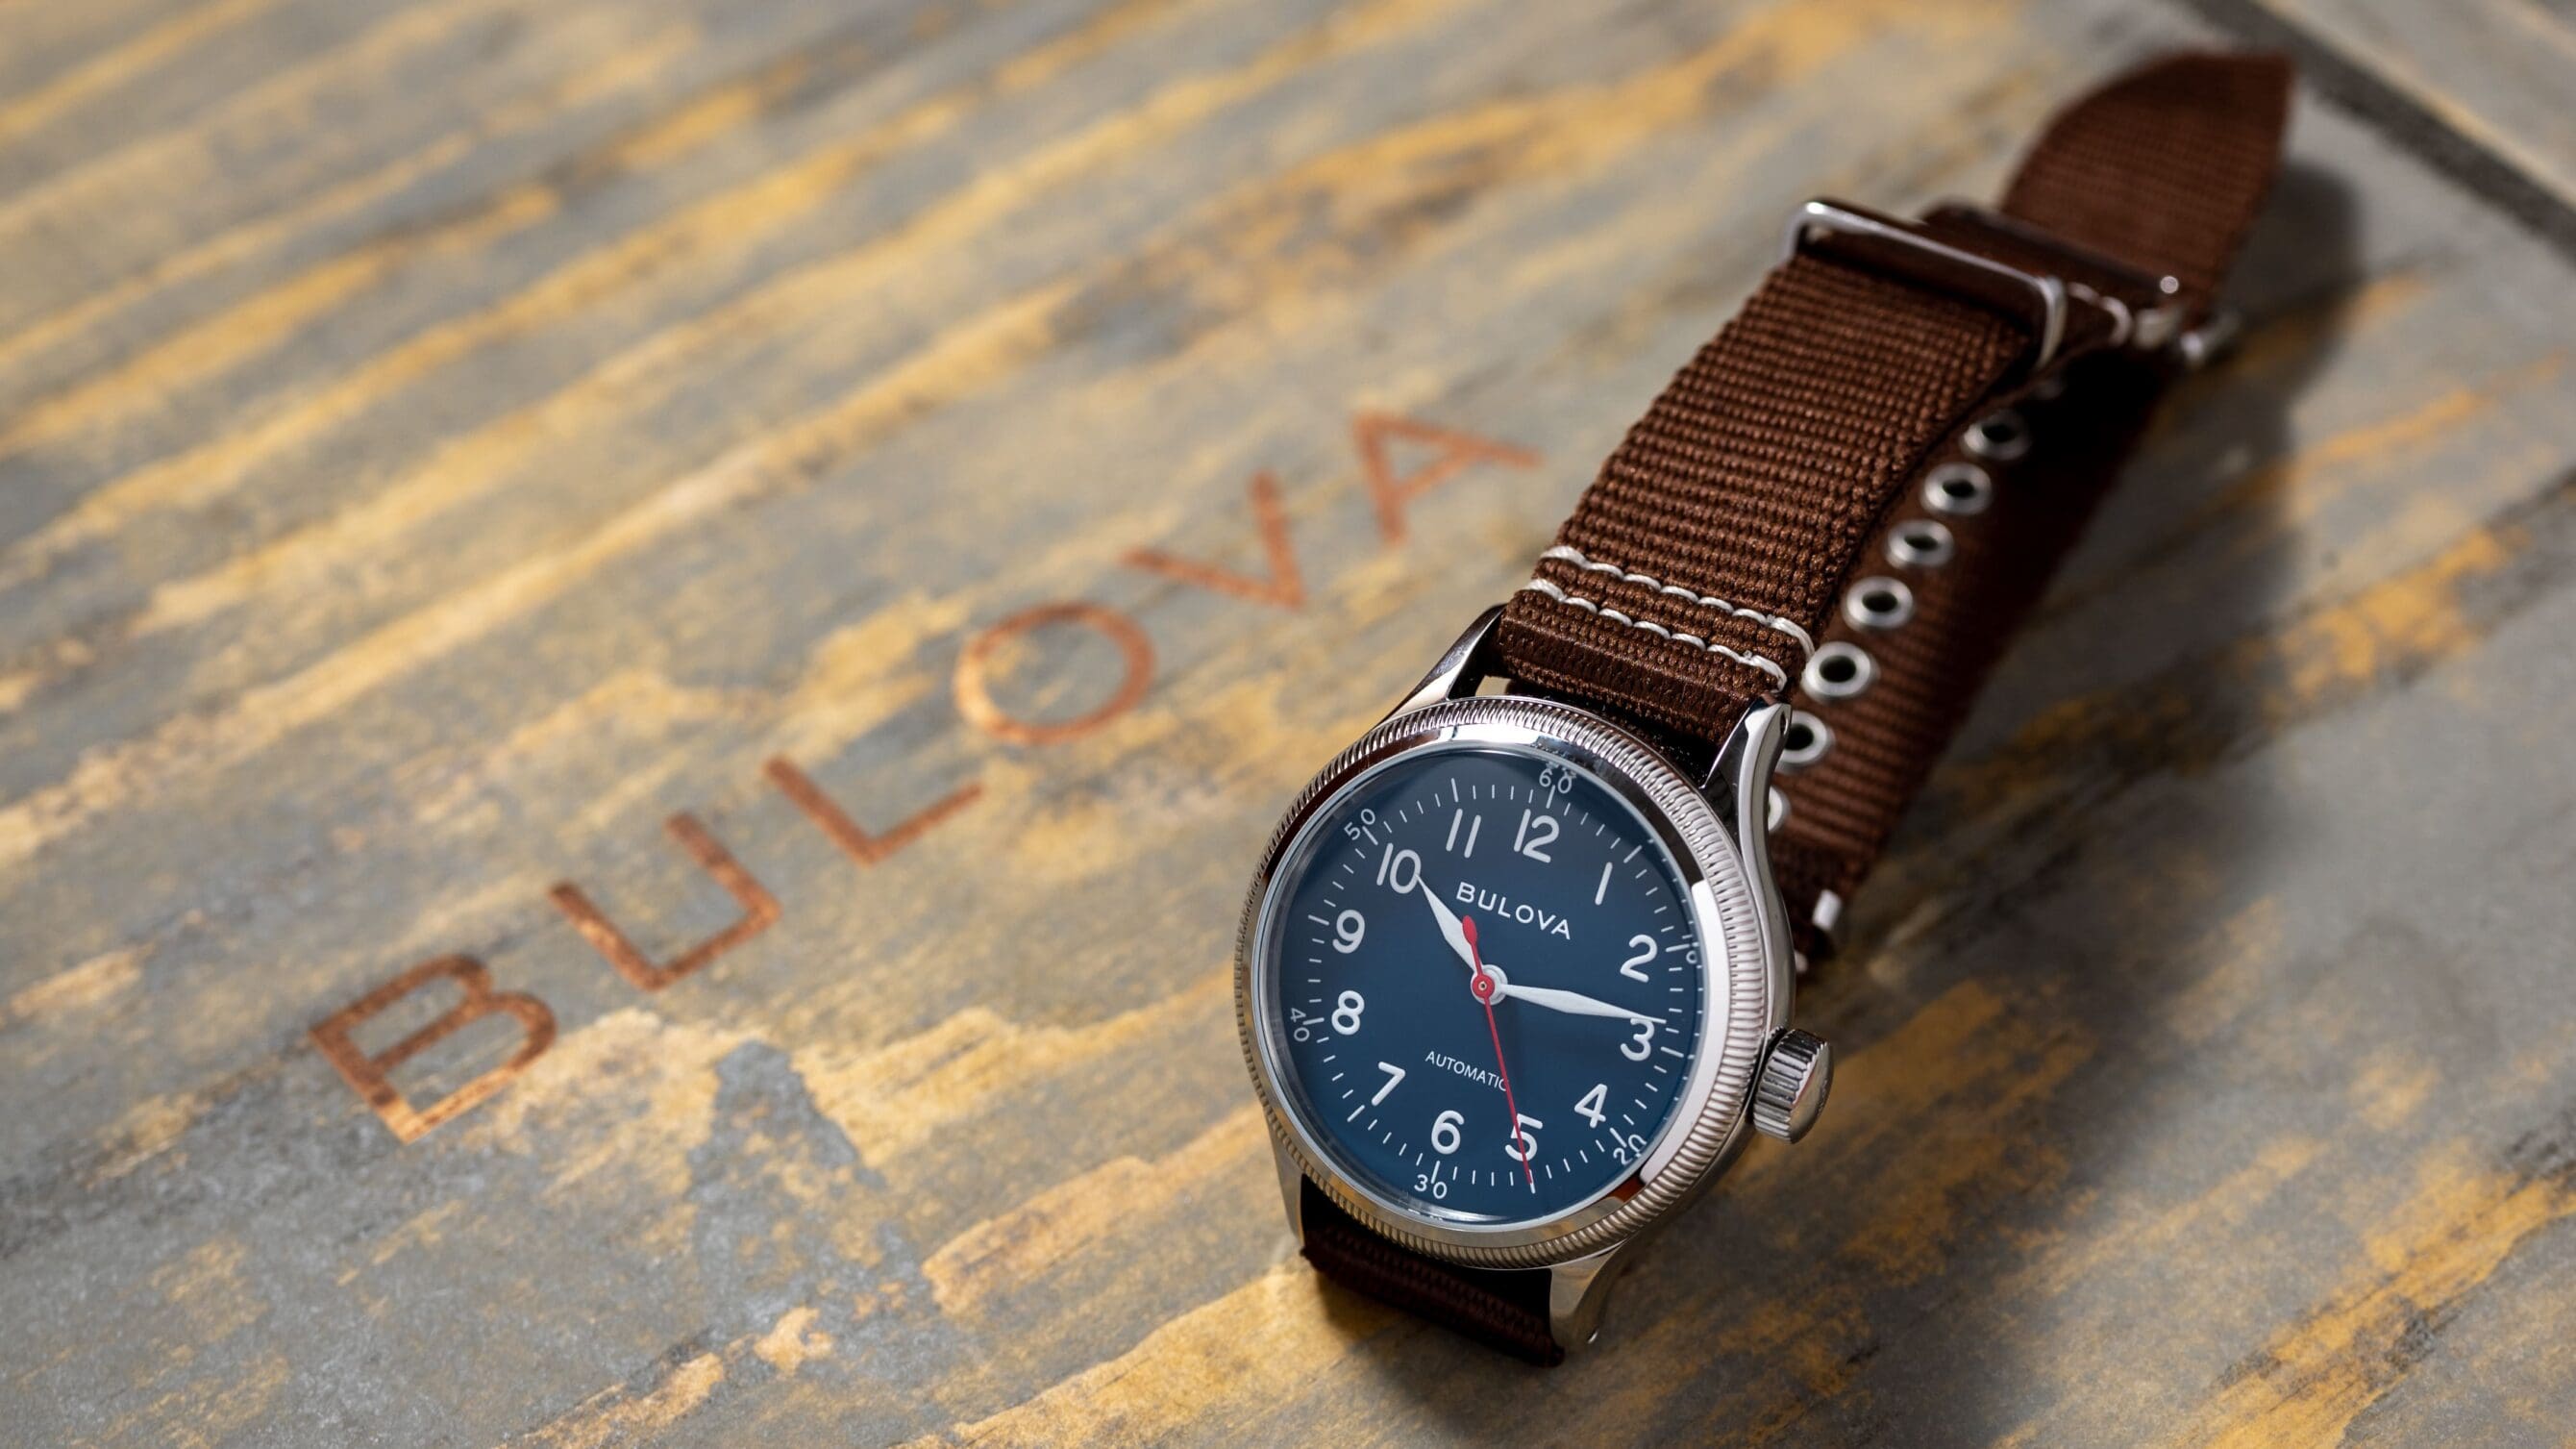 HANDS-ON: The Bulova Classic HACK Military is a handsome field watch for under $500 USD